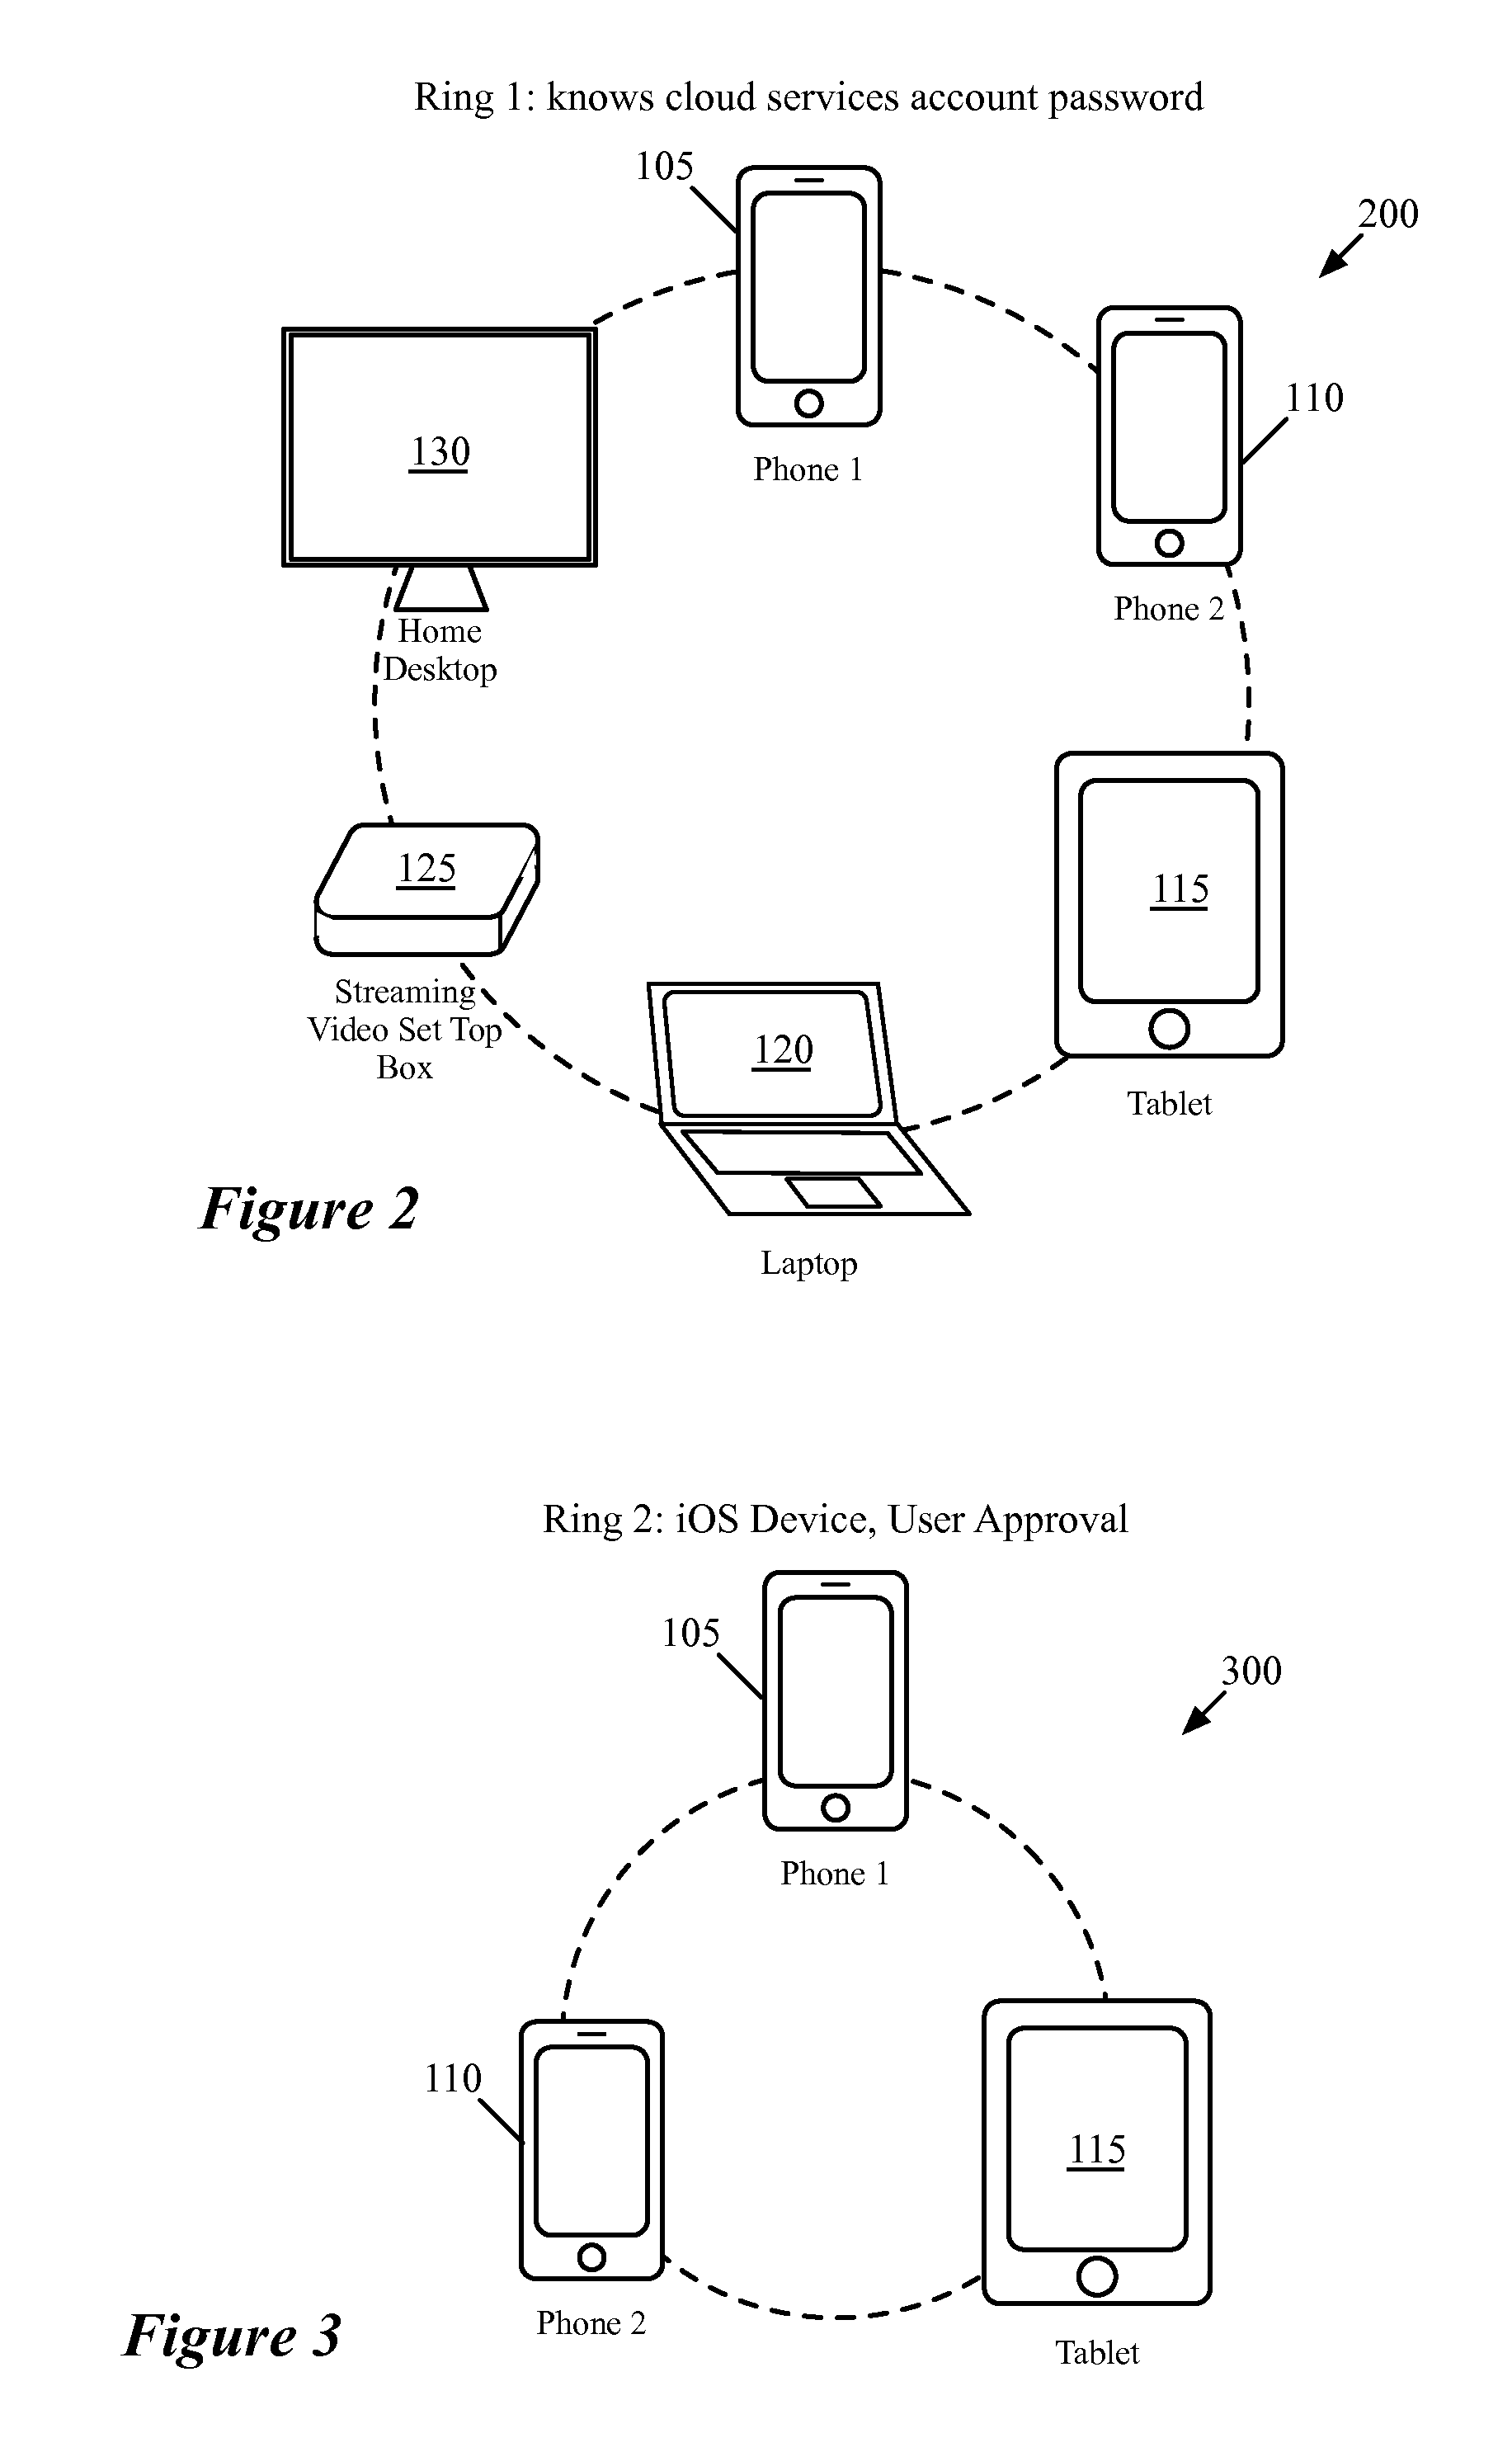 Synchronization And Verification Groups Among Related Devices